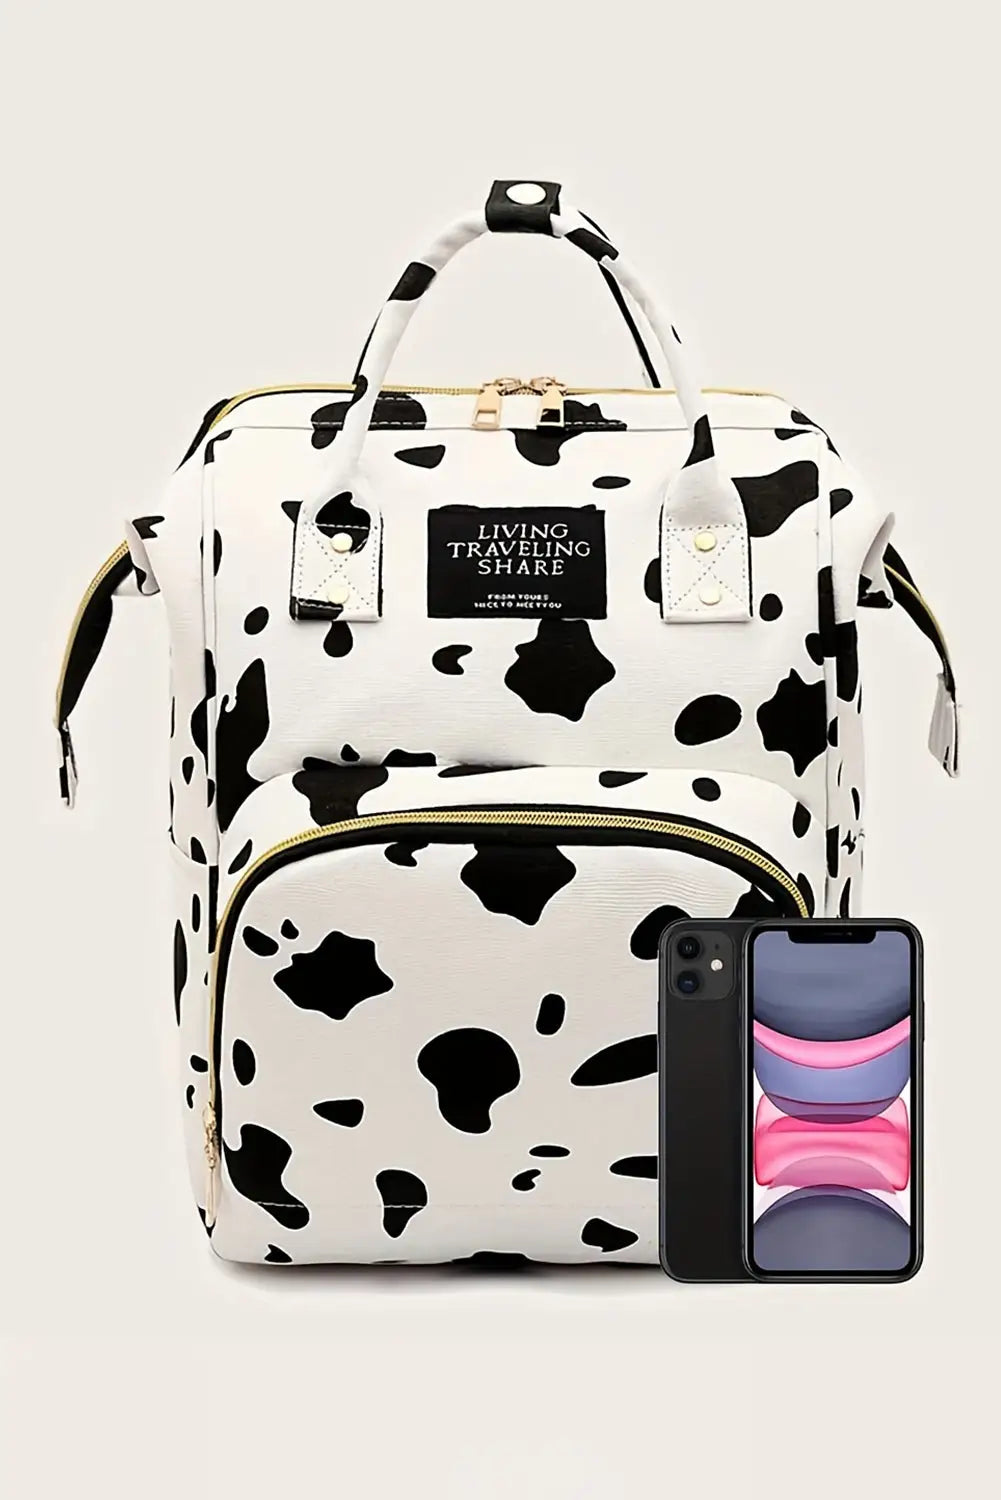 Bright white cow spot print multi pocket canvas backpack - one size / 100% polyester - backpacks